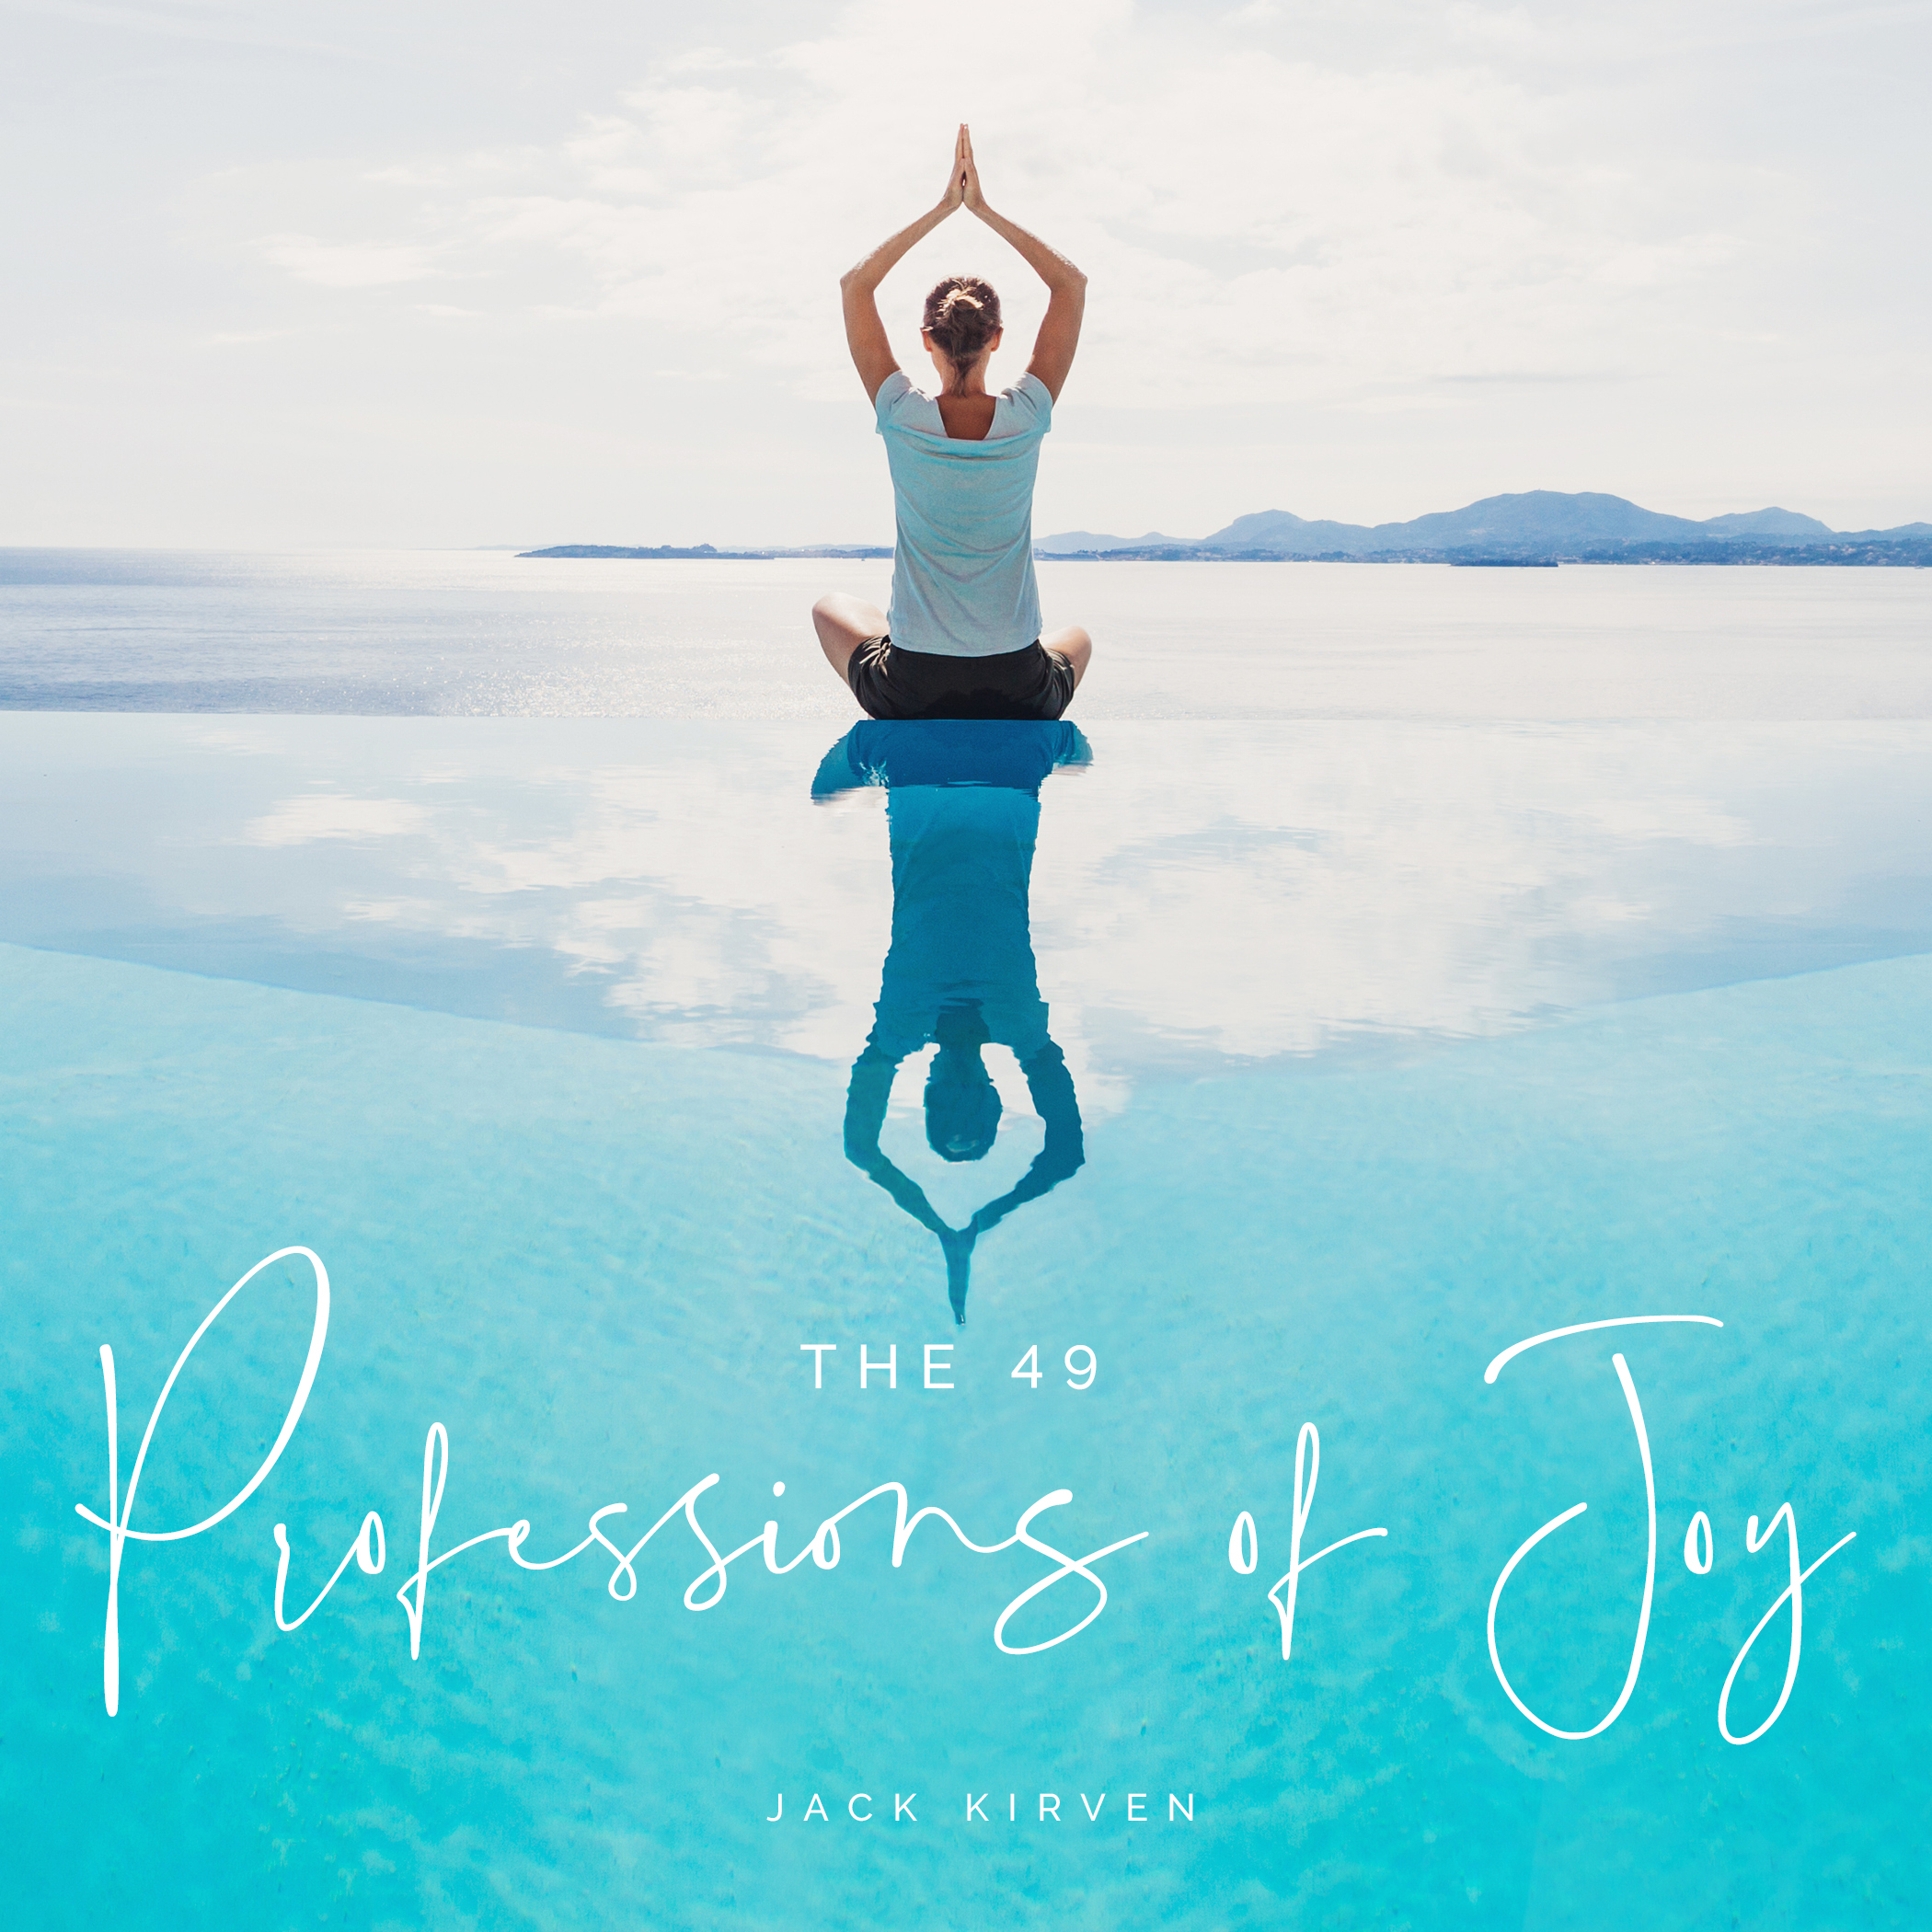 The 49 Professions of Joy is the coffee table art book of haiku and poetry written by personal trainer Jack Kirven as a supplement to his chakra alignment therapy class for 49Haiku.com.